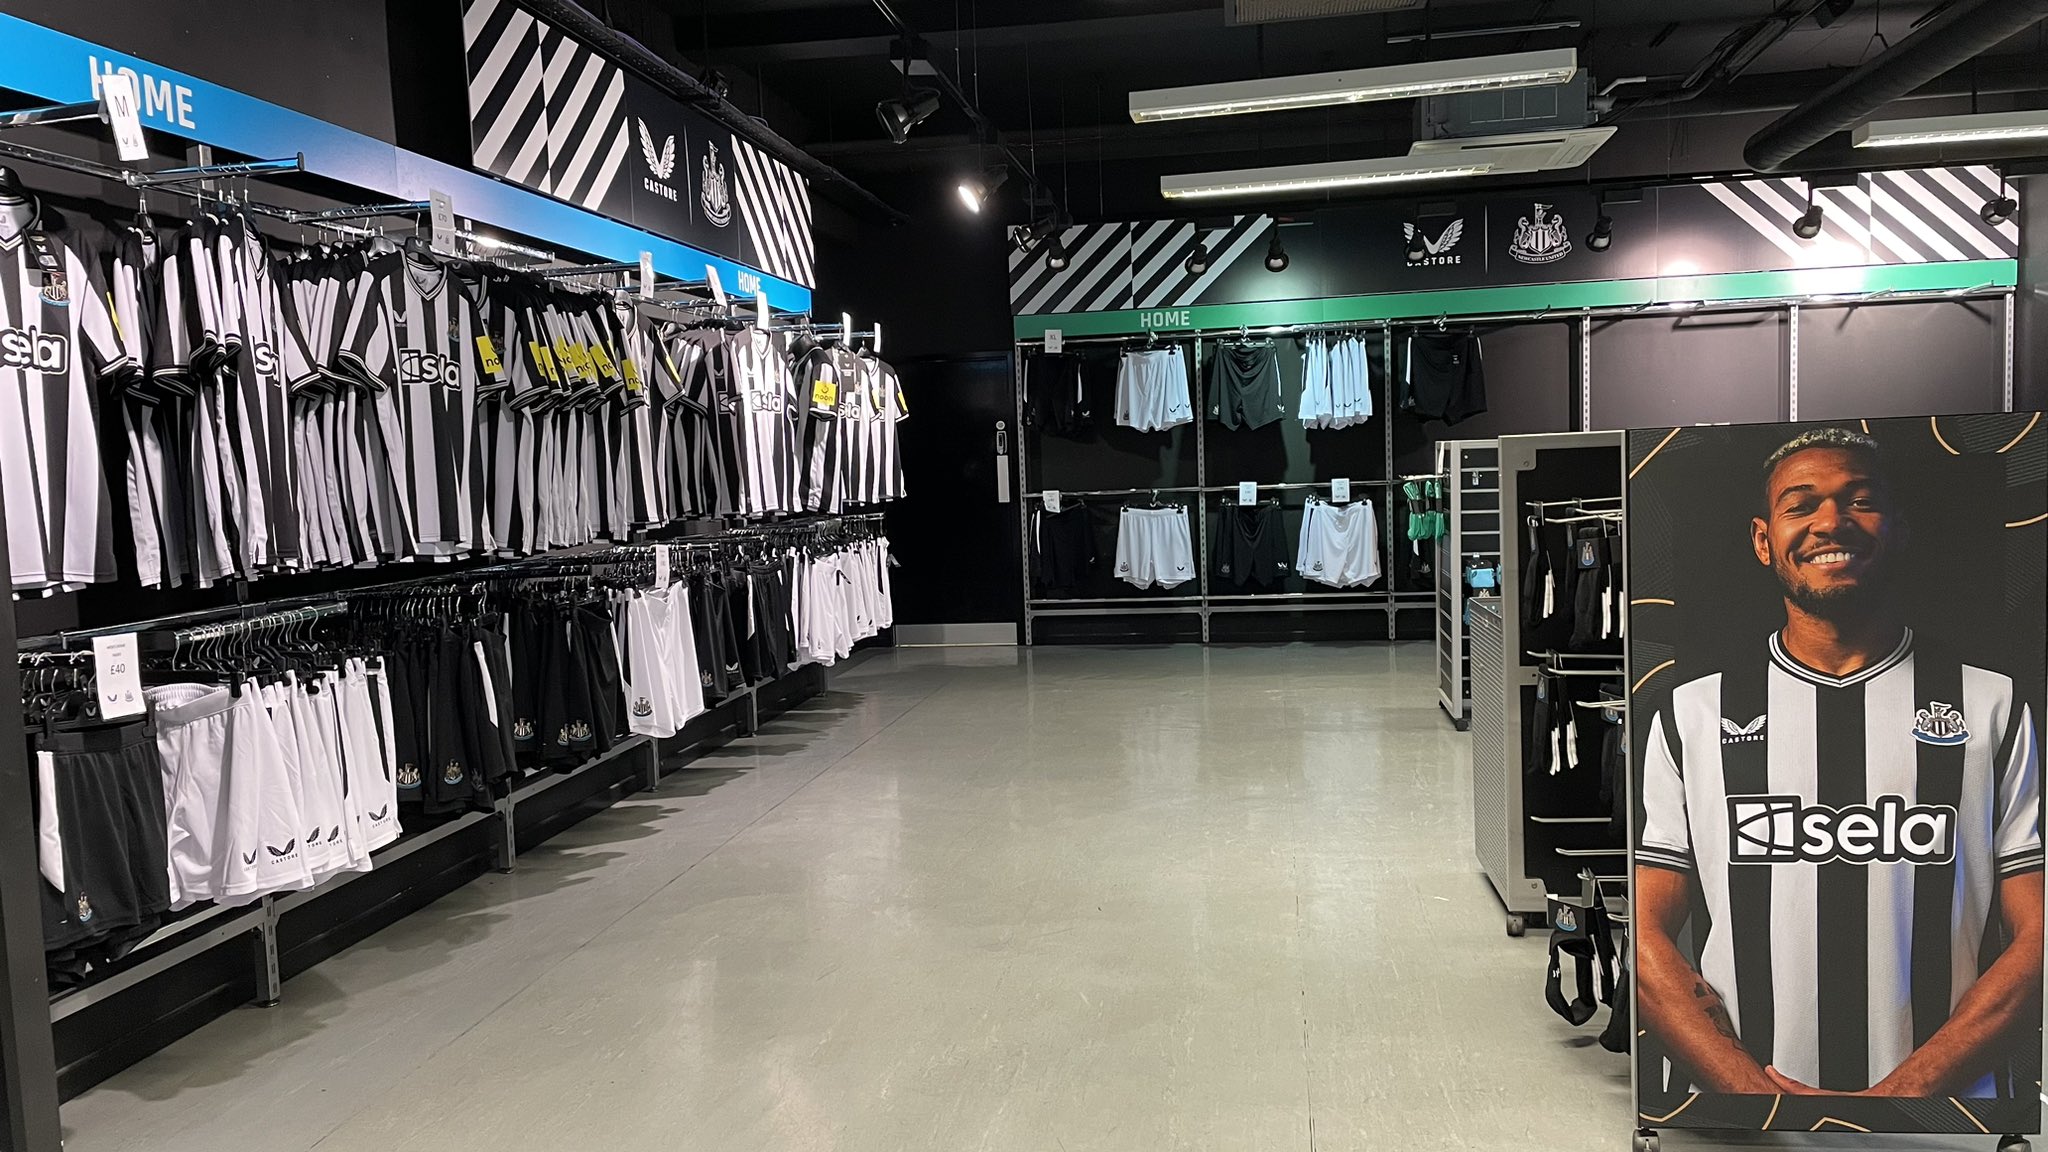 Adam Pearson (YT) ⚫️⚪️ on Twitter: "Newcastle United's club has less than 60 shirts remaining after 1 week since the release date I was also told that staff members have